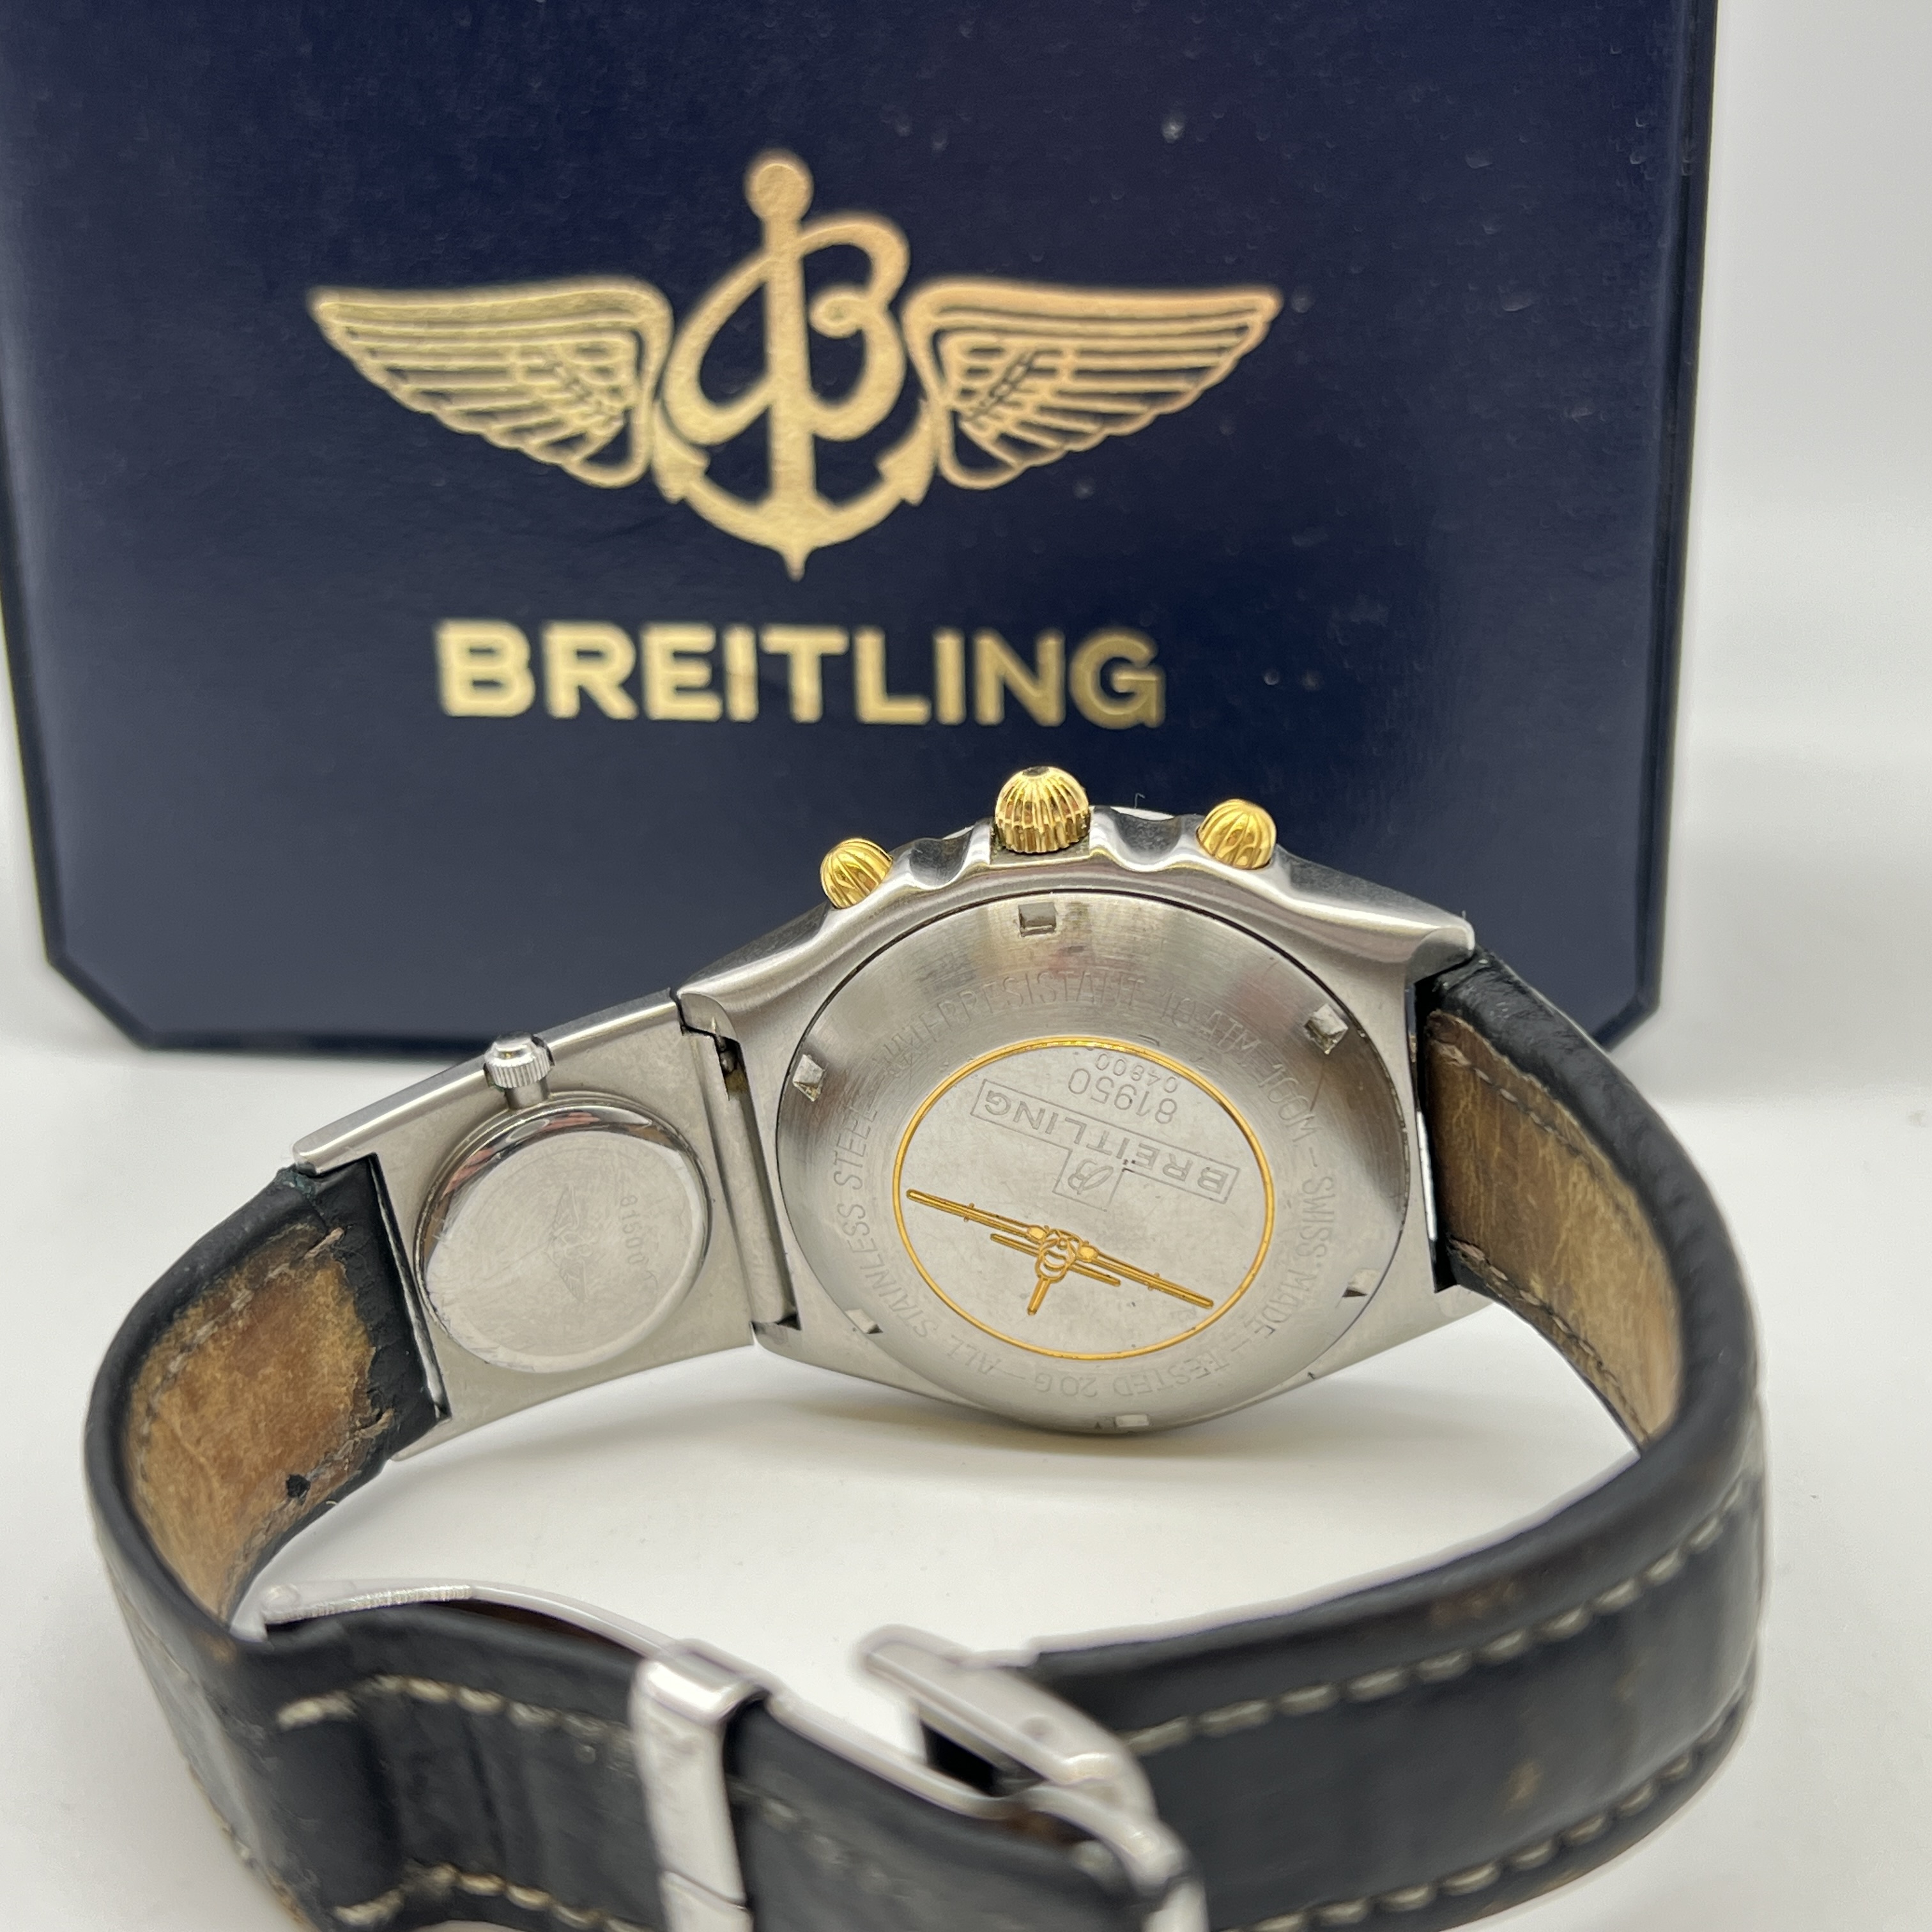 A Breitling chronograph stainless steel and gold watch - Image 9 of 11